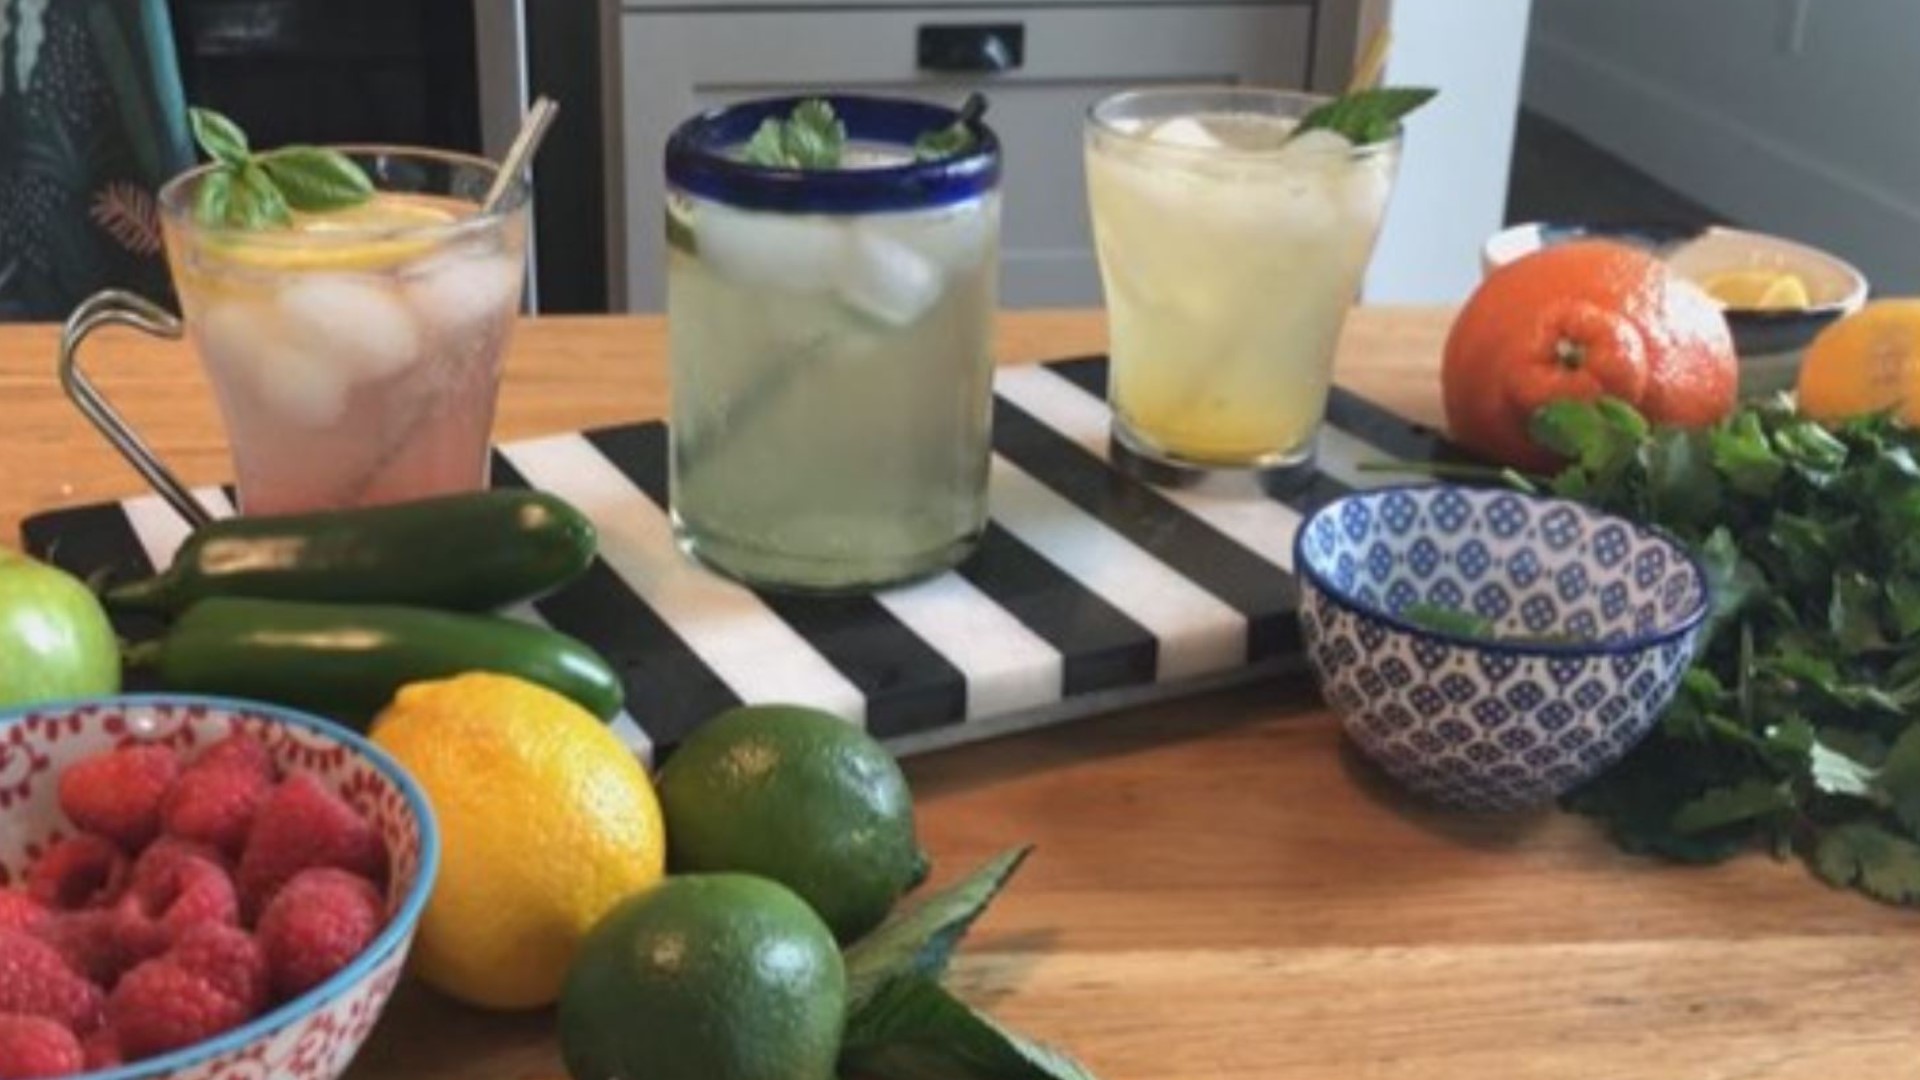 Celebrate the holiday weekend safely with three mocktails that pack a tasty punch.